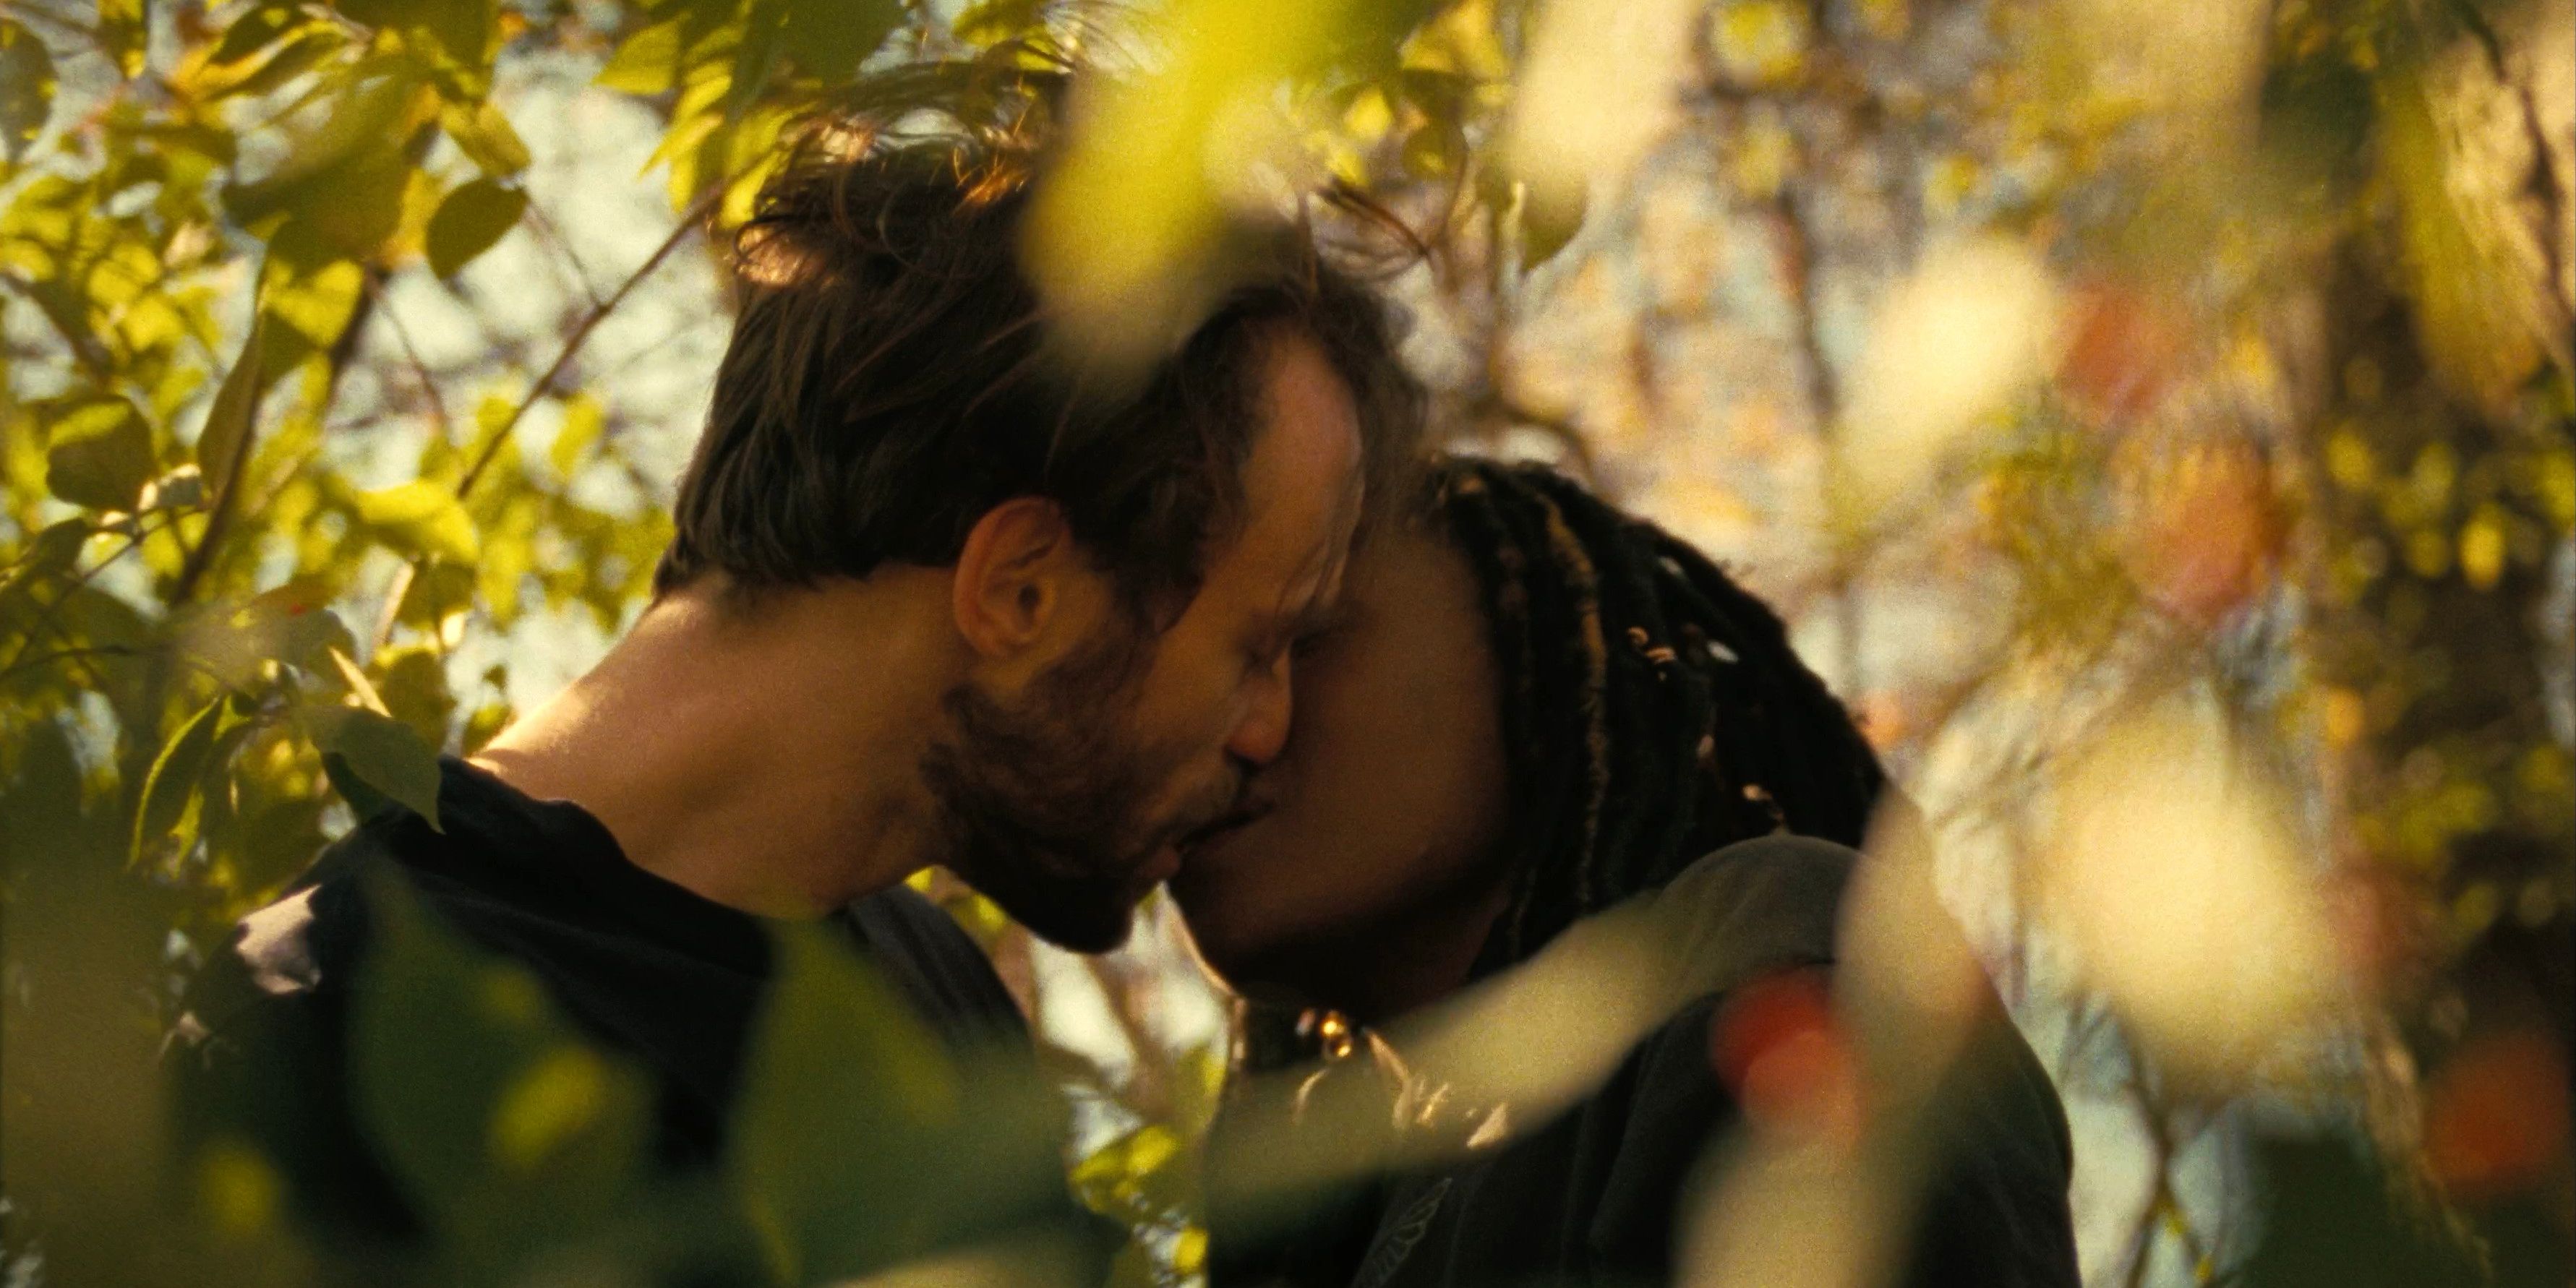 Casey and Dandelion kissing surrounded by yellow leaves in Dandelion